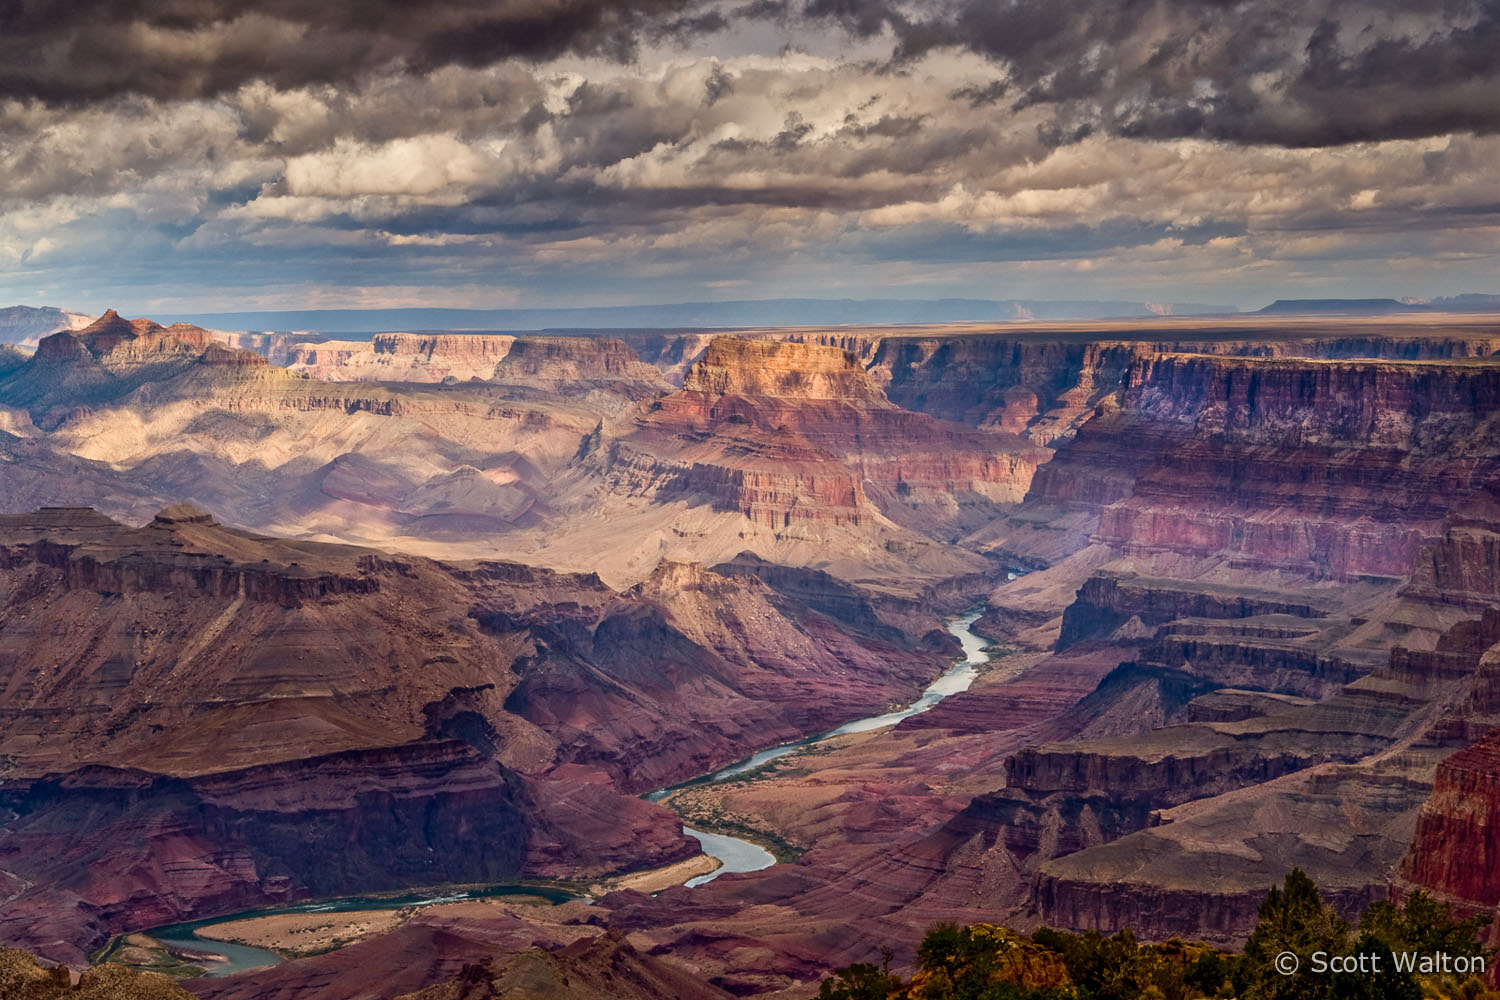 desert-view-clearing-storm-color-grand-canyon-national-park-arizona.jpg